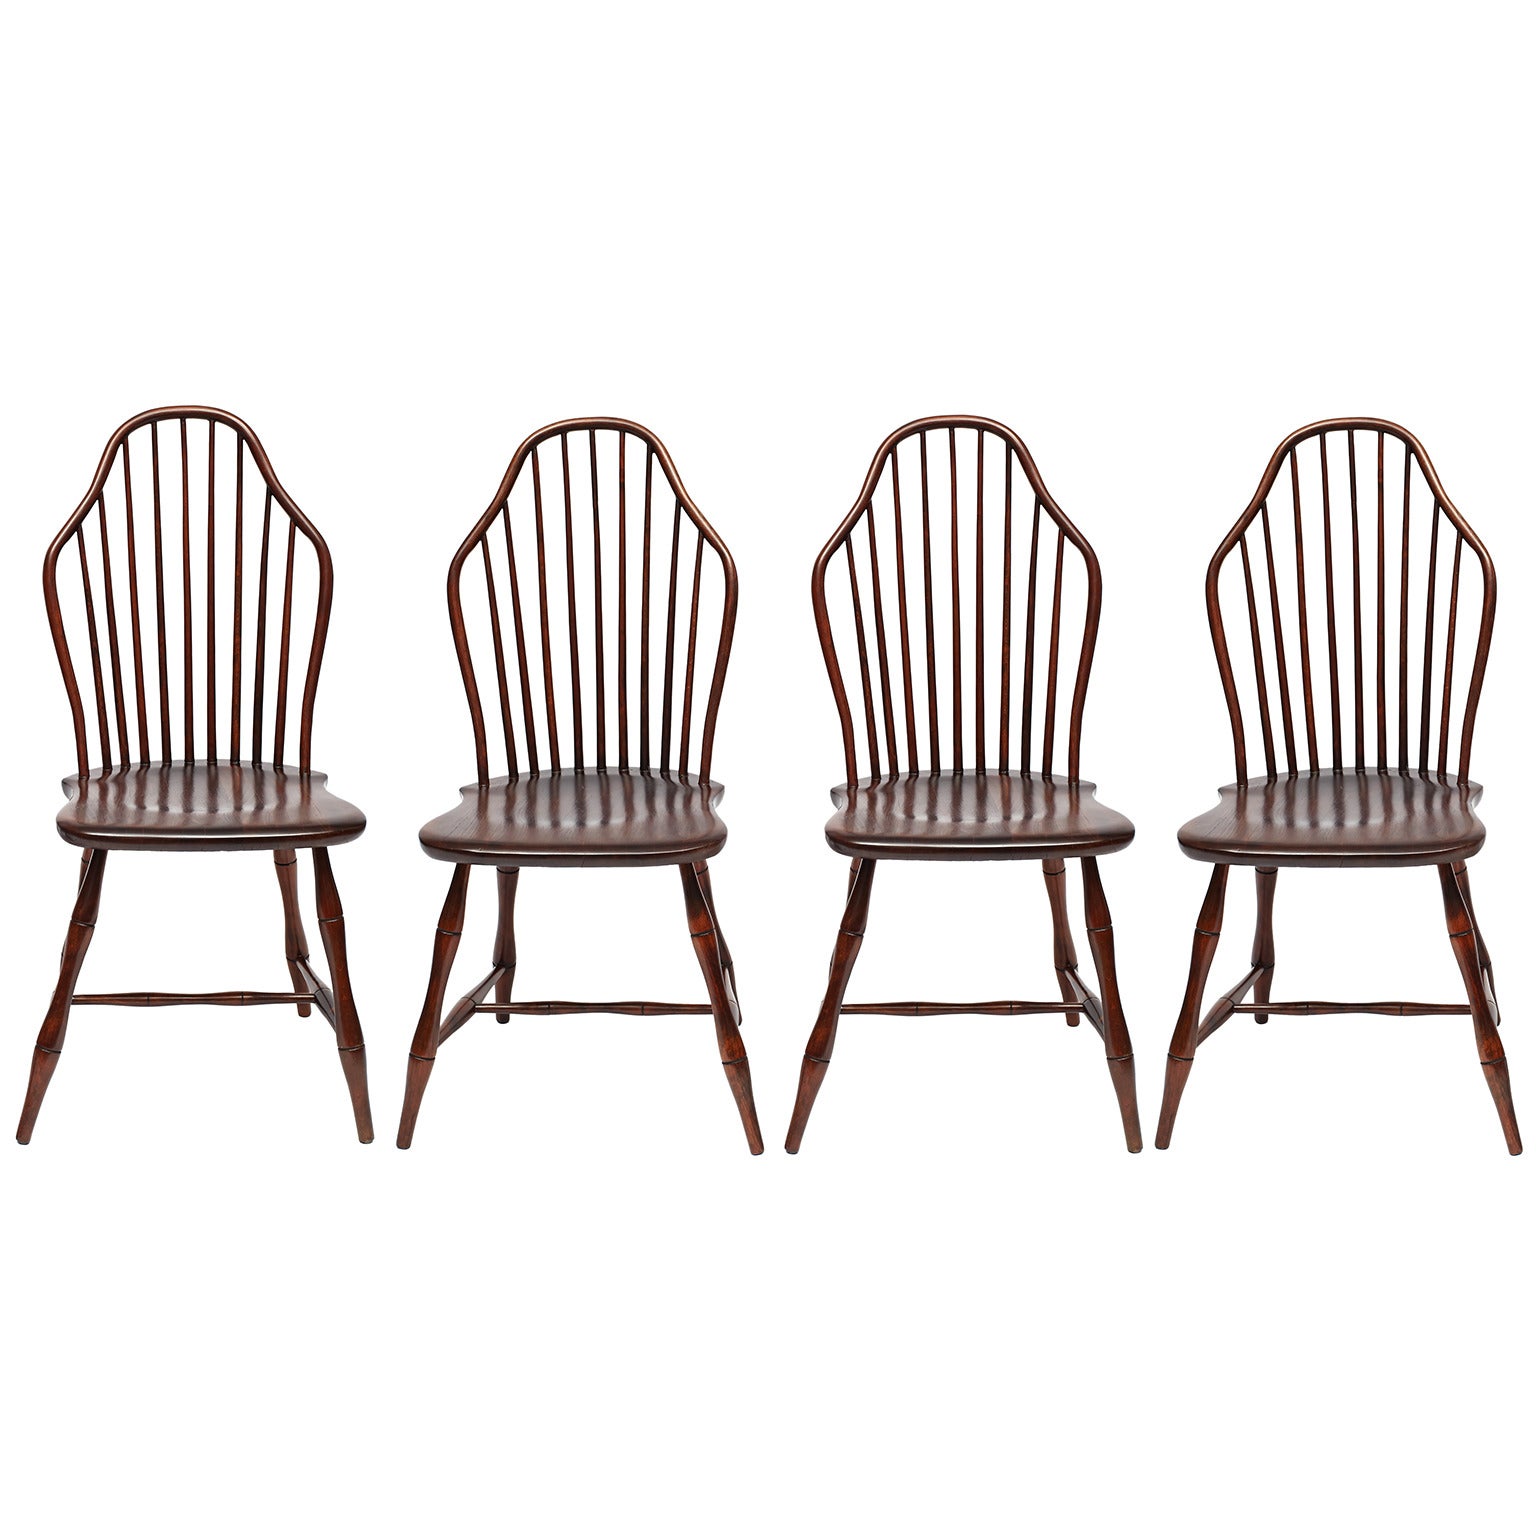 Set of Four Late 19th c. Pinched Sack-Back Windsor Chairs